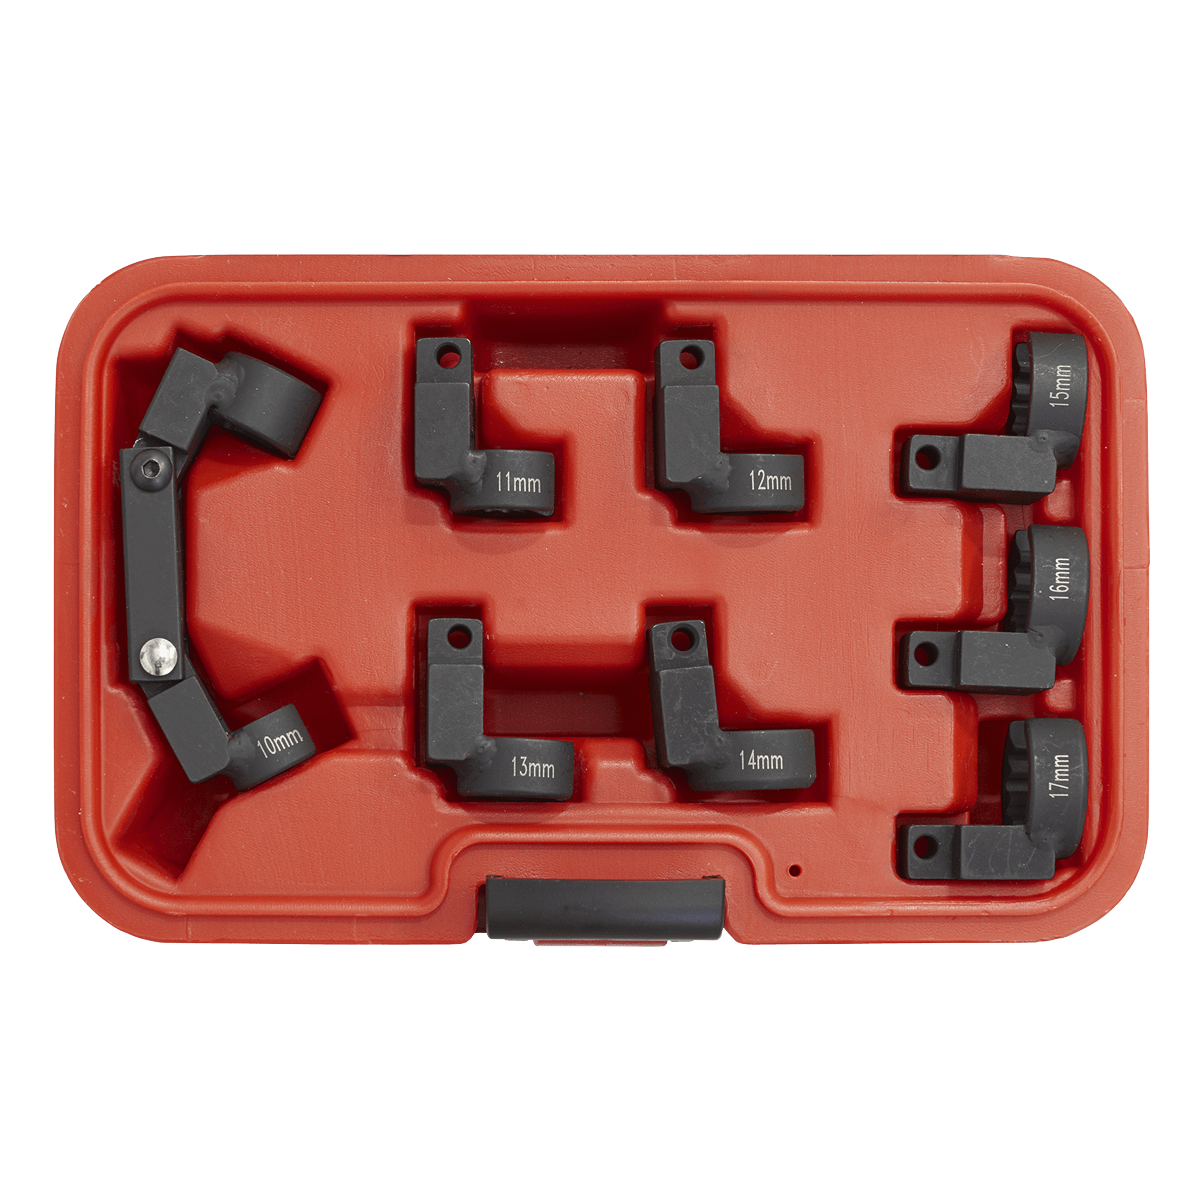 Injector Pipe Socket Set 9pc 3/8"Sq Drive | Set includes flexible 3/8"Sq drive adaptor, hinged at both ends for ease of access to confined areas and 10-17mm crow's foot injector pipe sockets. | toolforce.ie